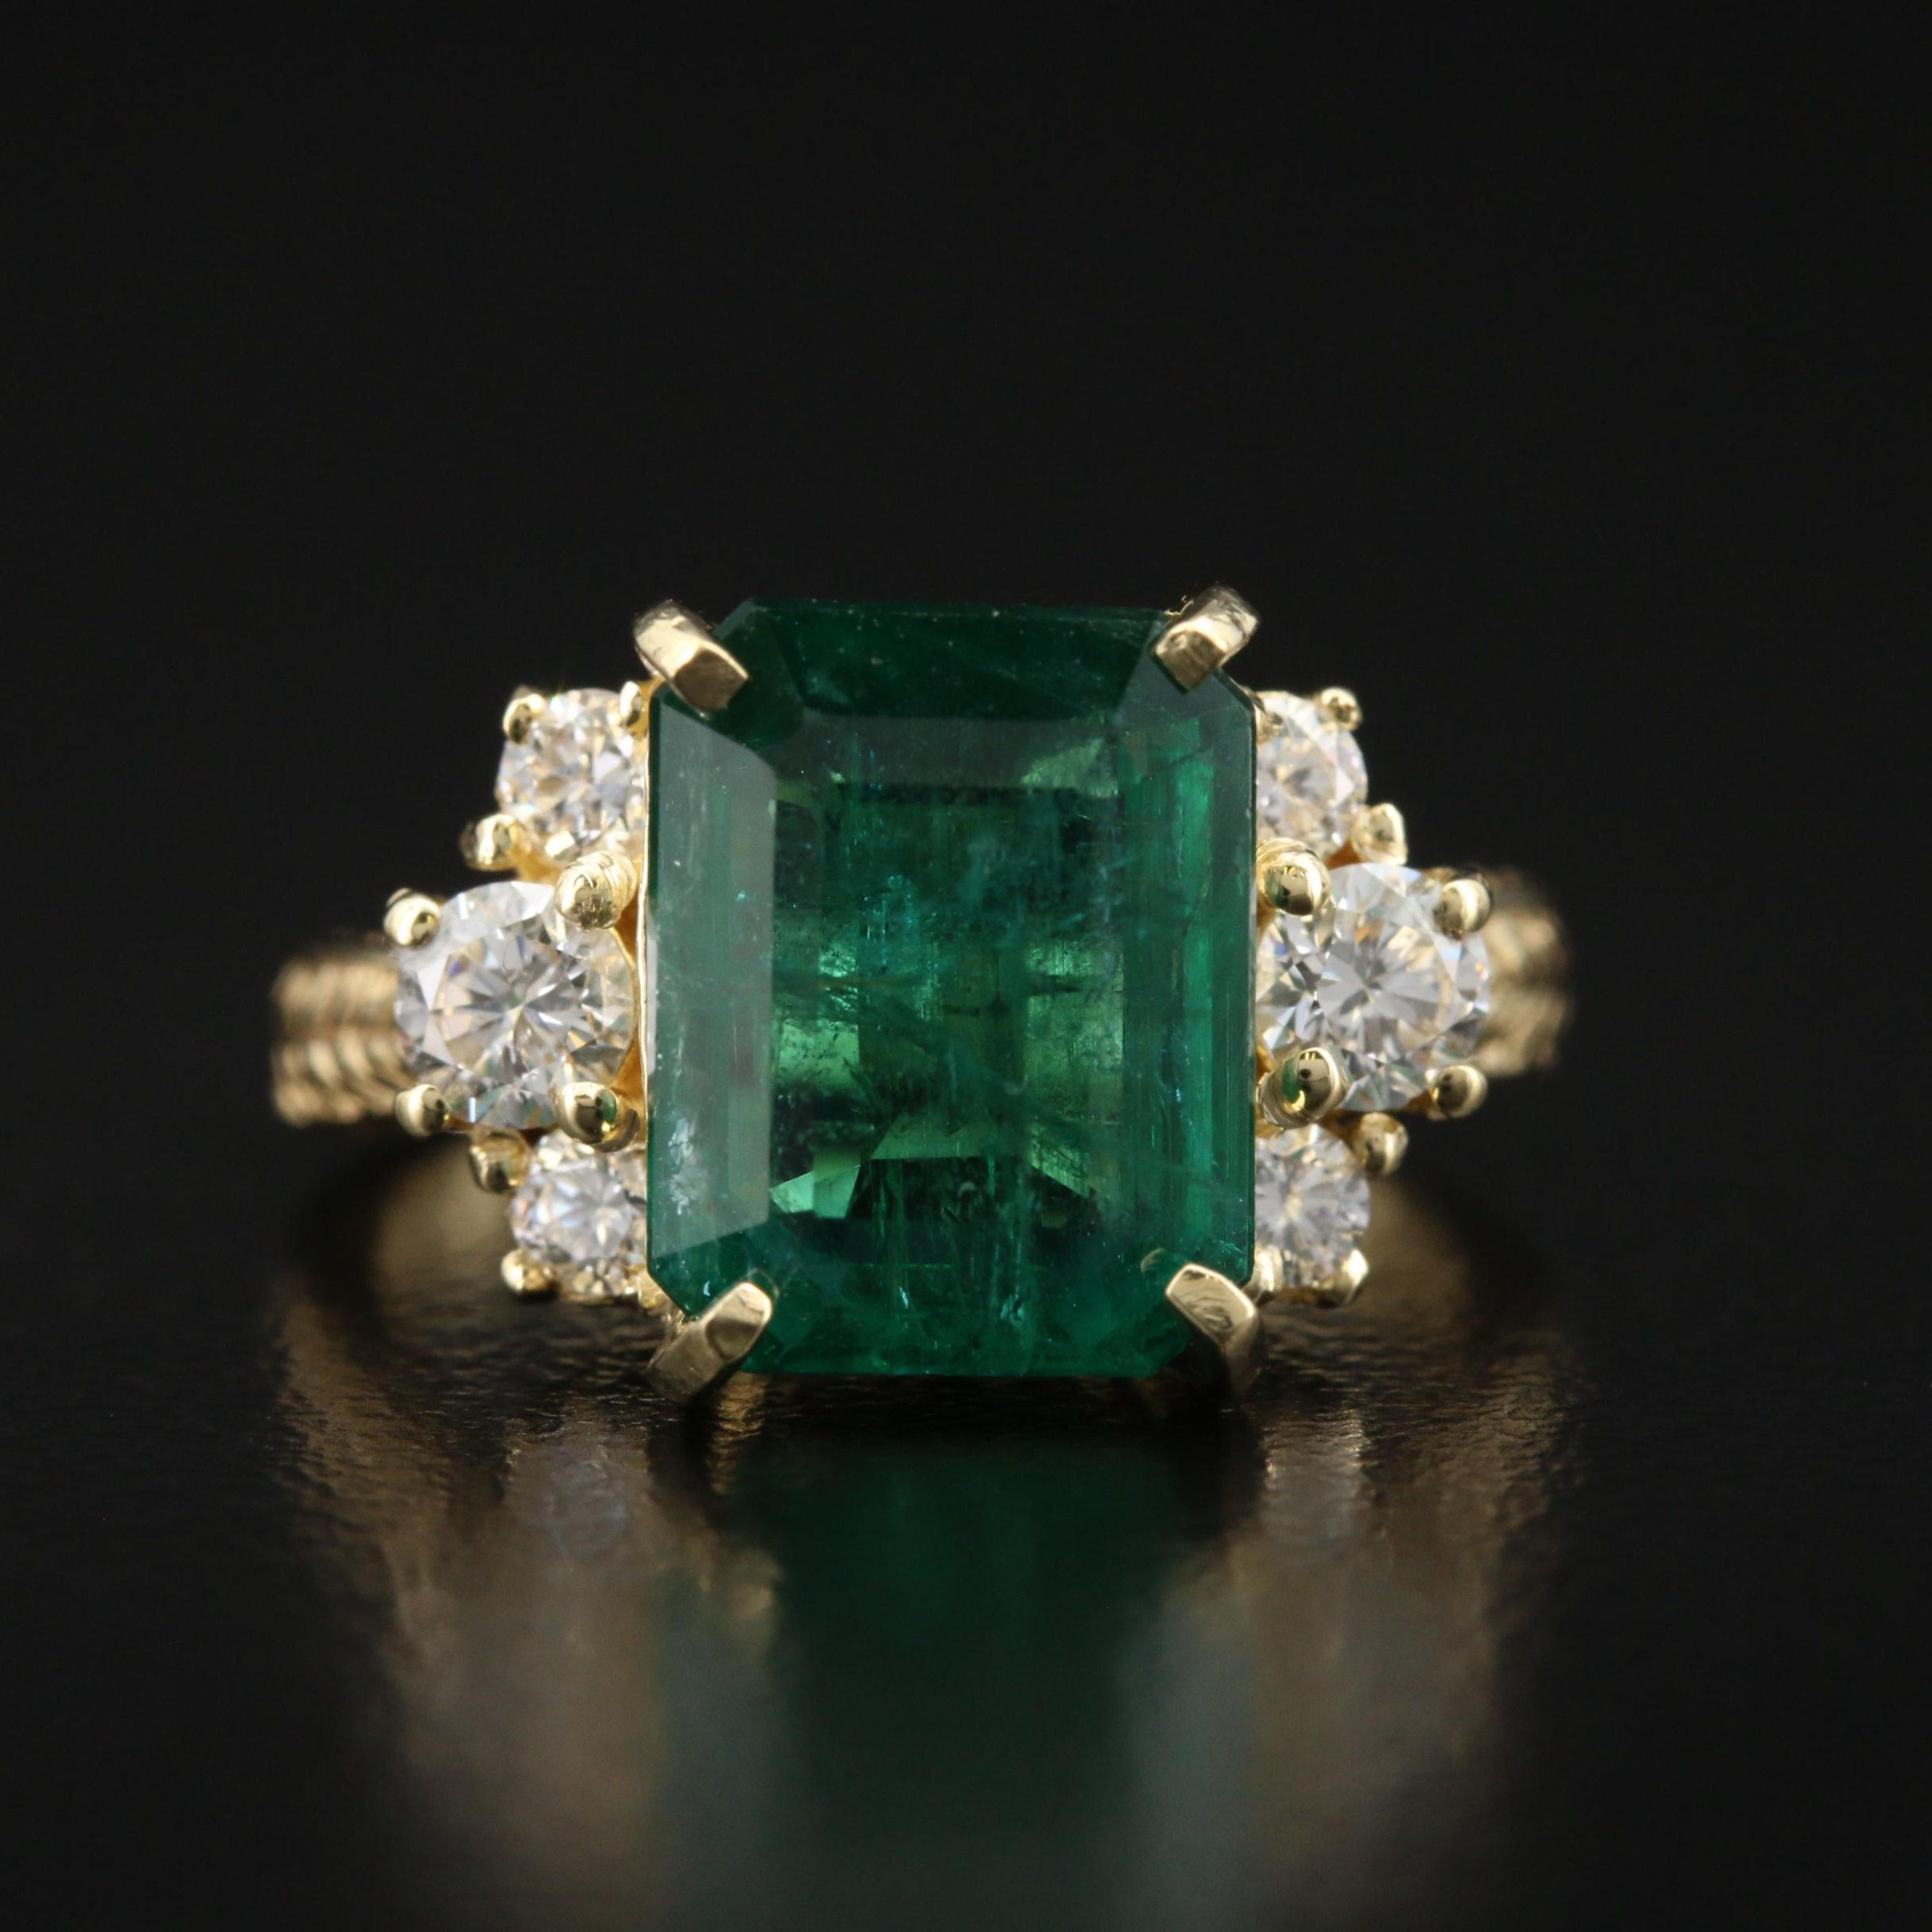 For Sale:  4 Carat Natural Emerald Diamond Engagement Ring Set in 18K Gold, Cocktail Ring 6